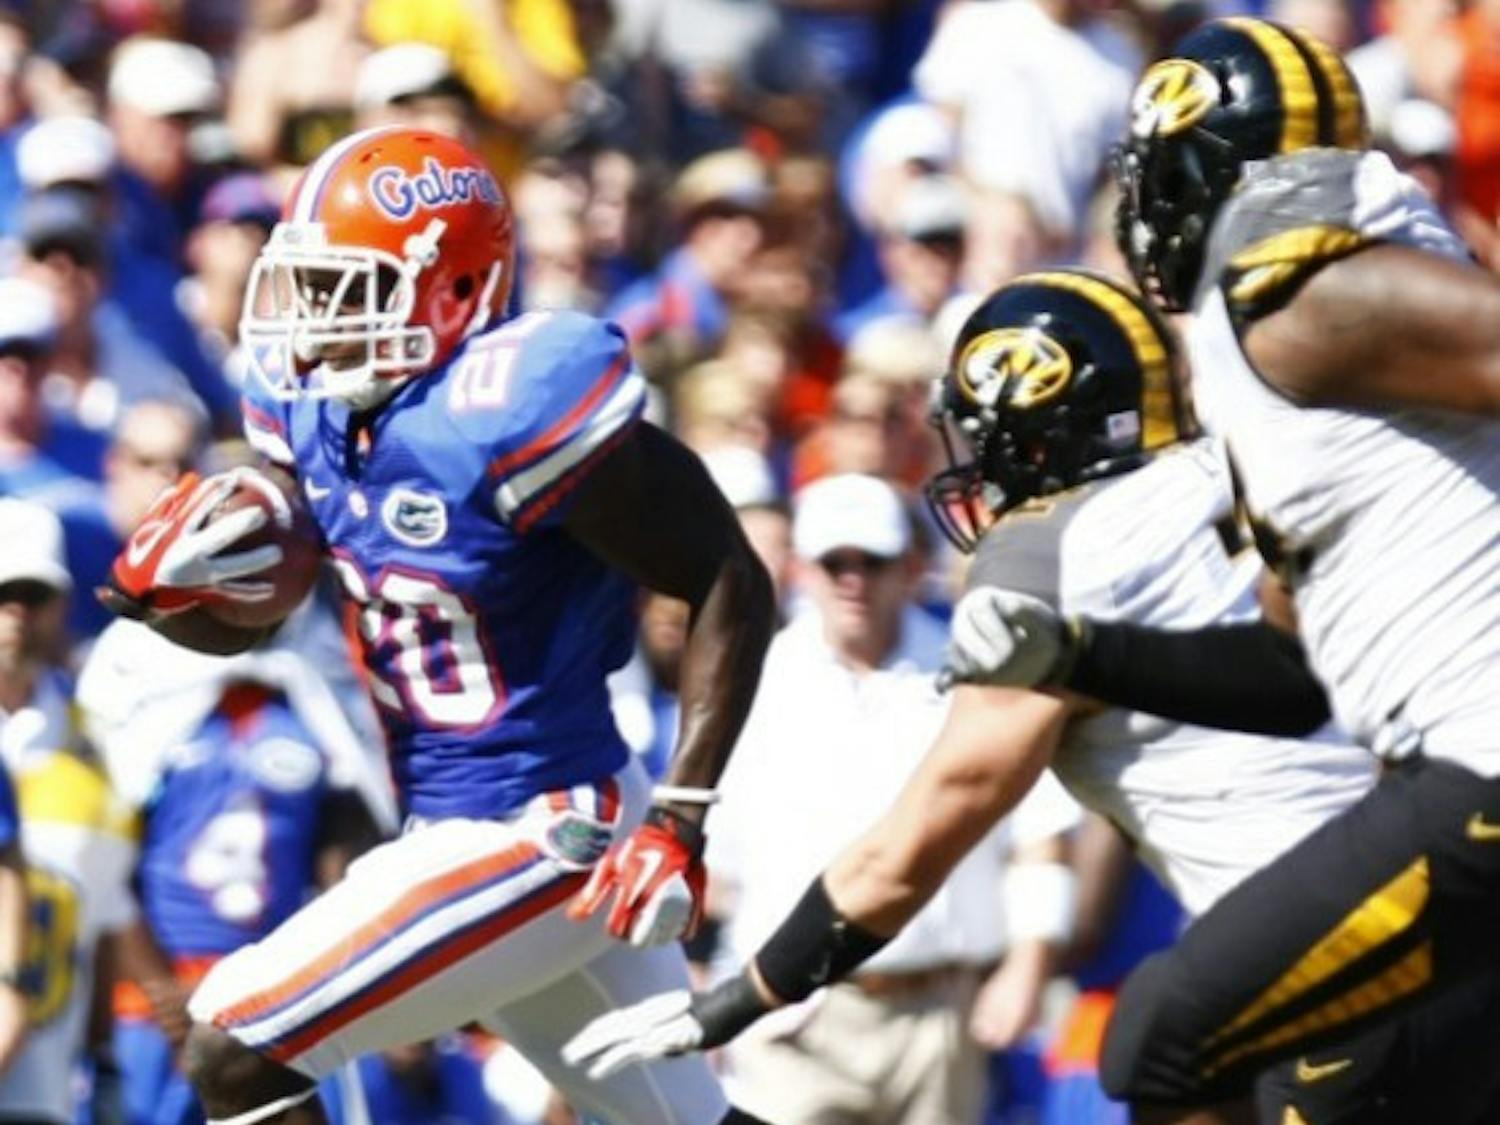 Omarius Hines runs by two Missouri defenders en route to a 36-yard touchdown in UF’s 14-7 win on Saturday in The Swamp.
